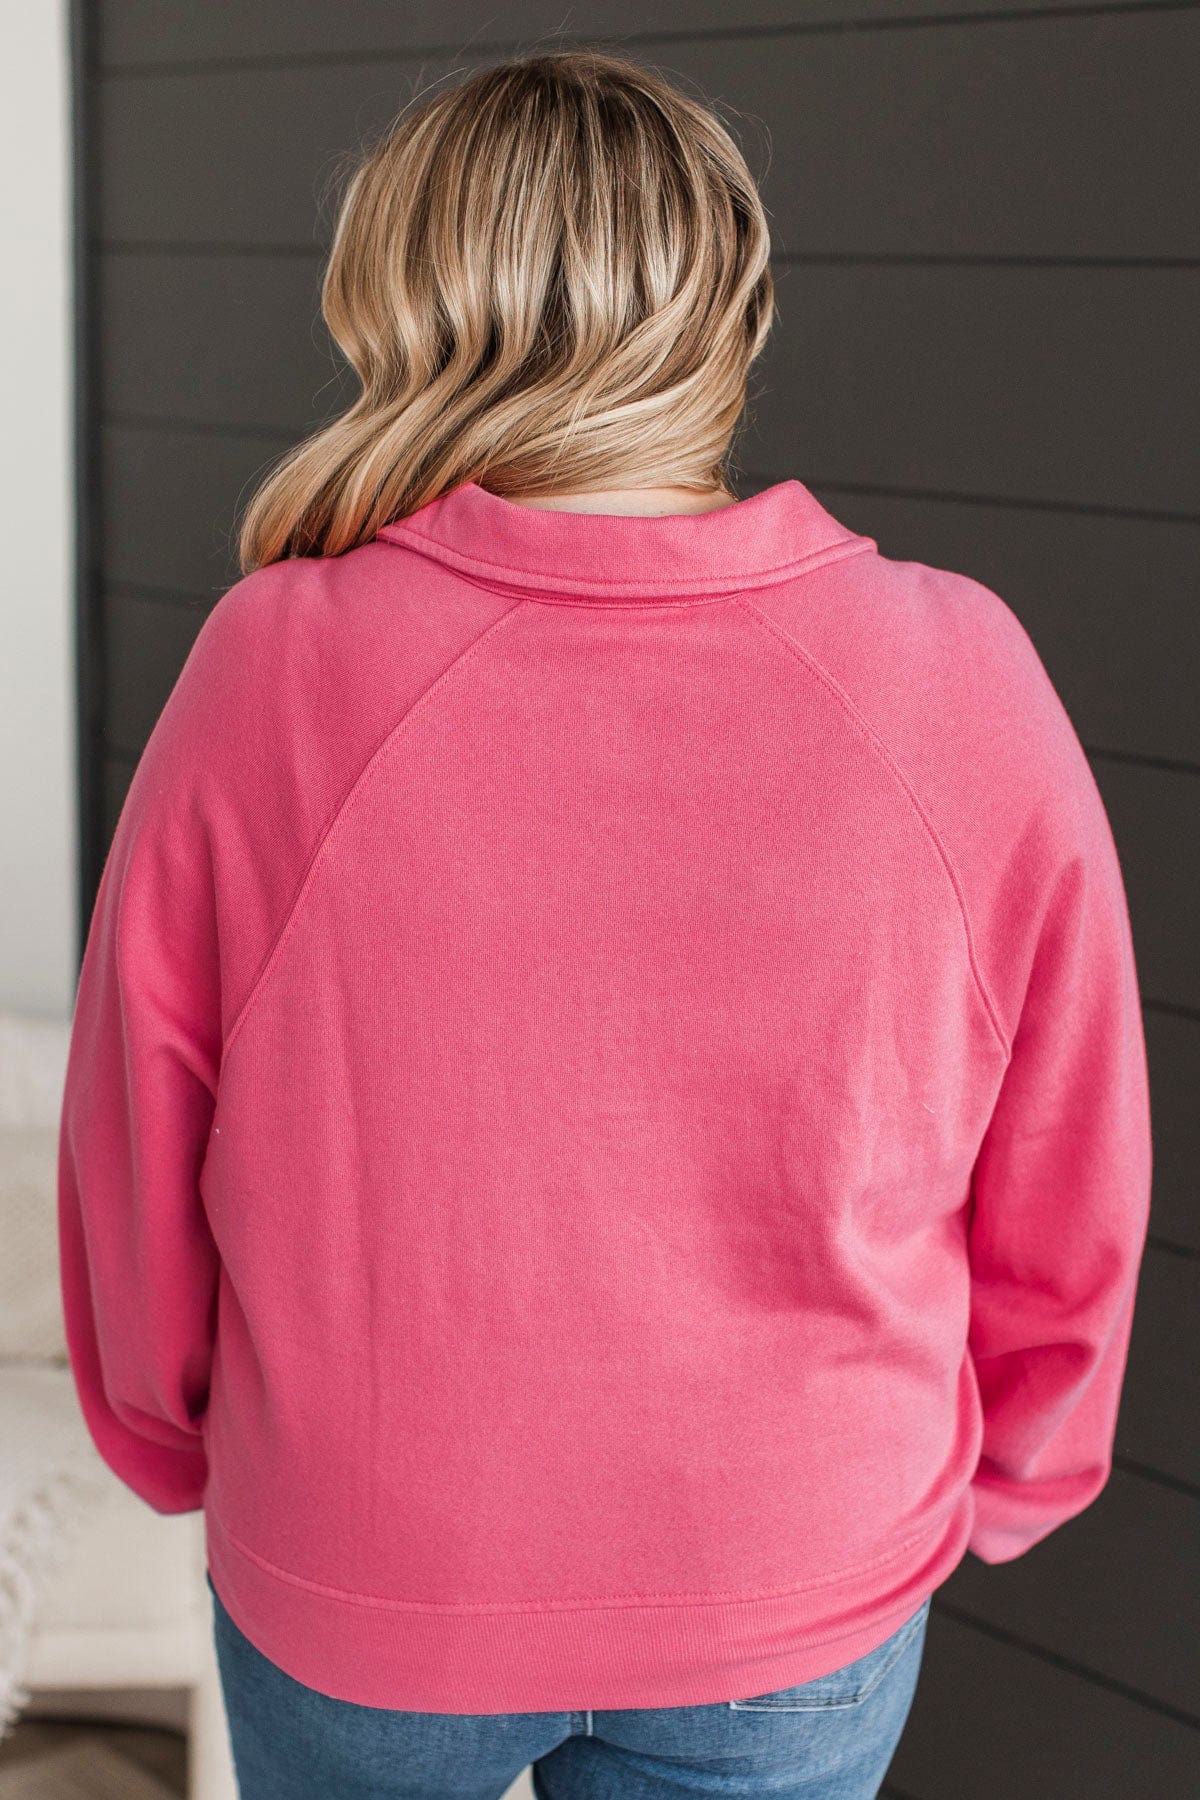 Natural Charm Pullover Top- Pink